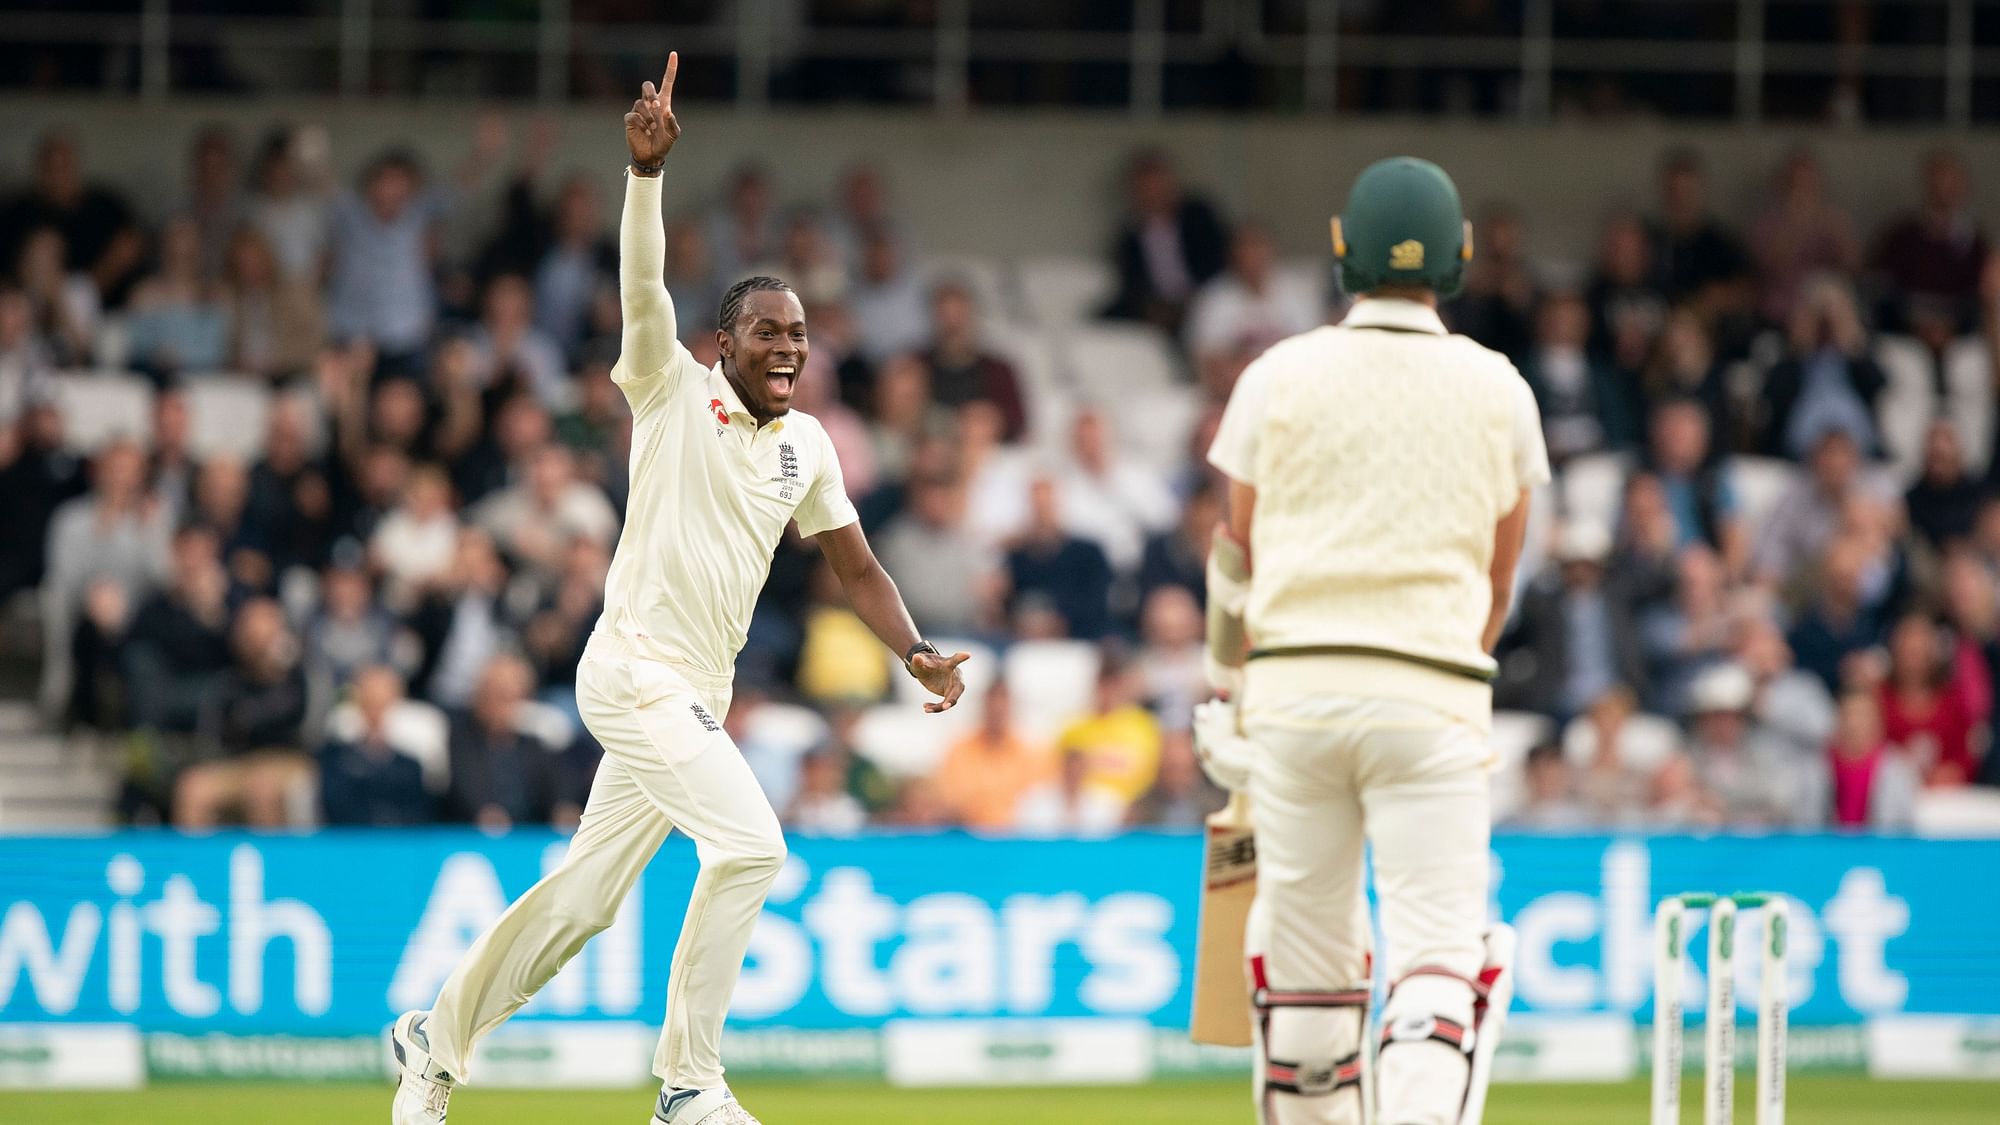 England’s Jofra Archer celebrates after taking his 5th wicket